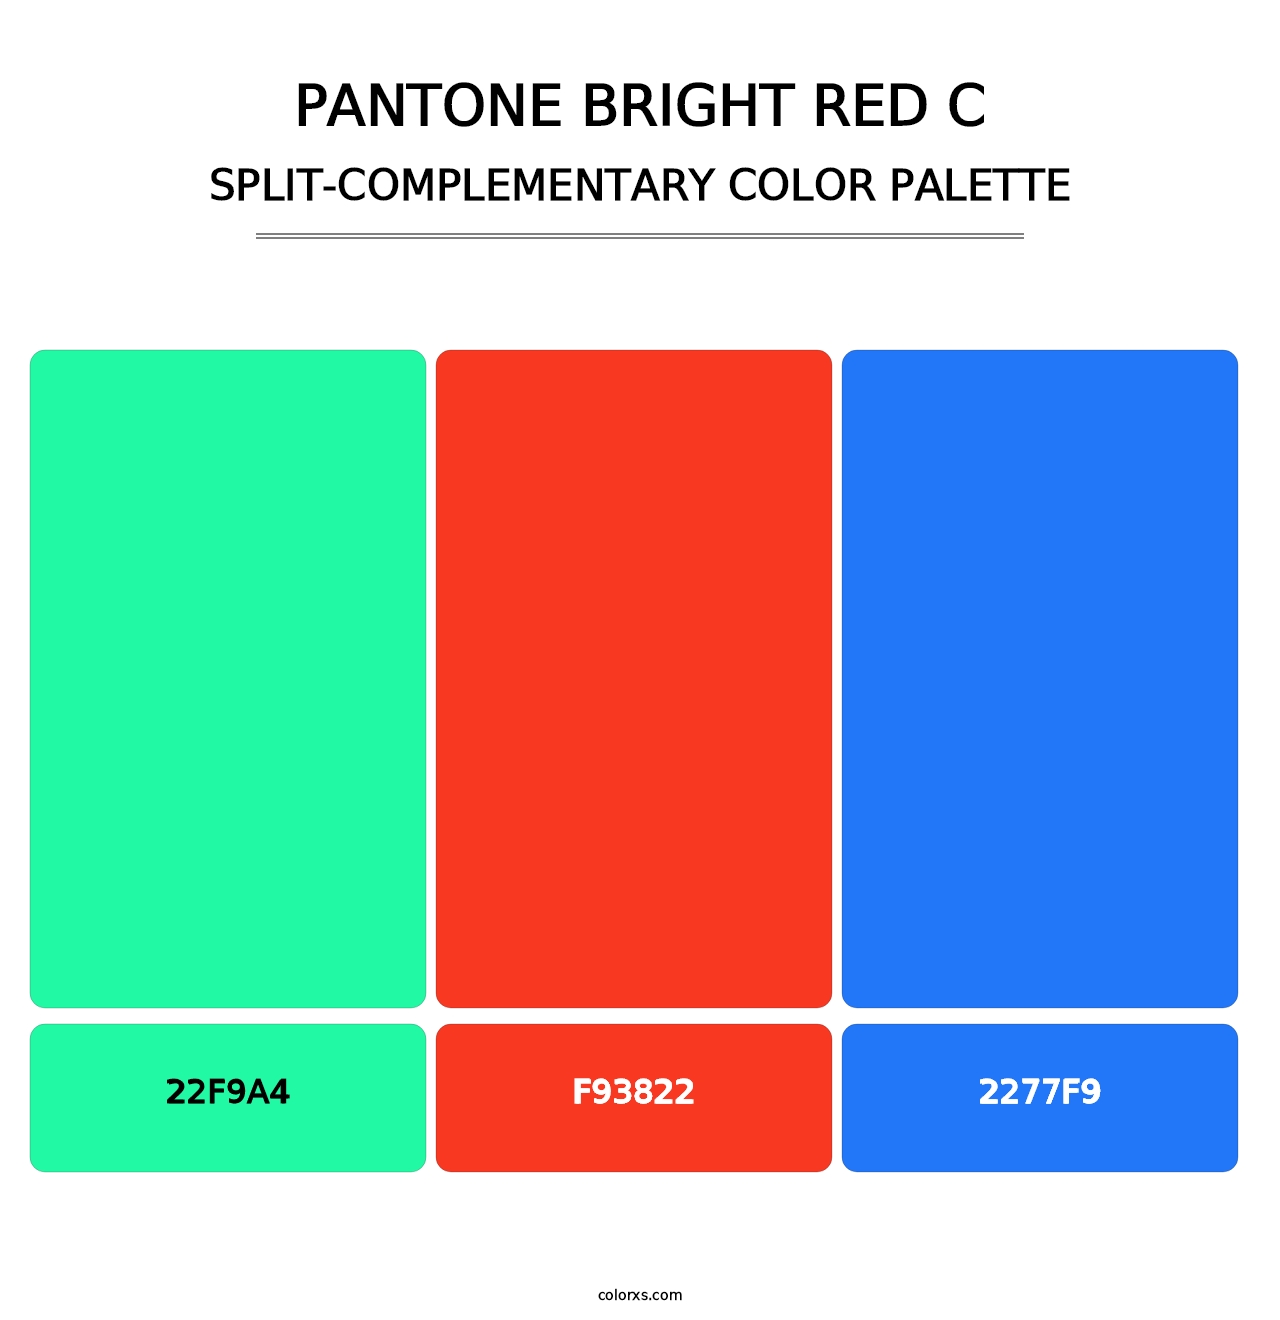 PANTONE Bright Red C - Split-Complementary Color Palette